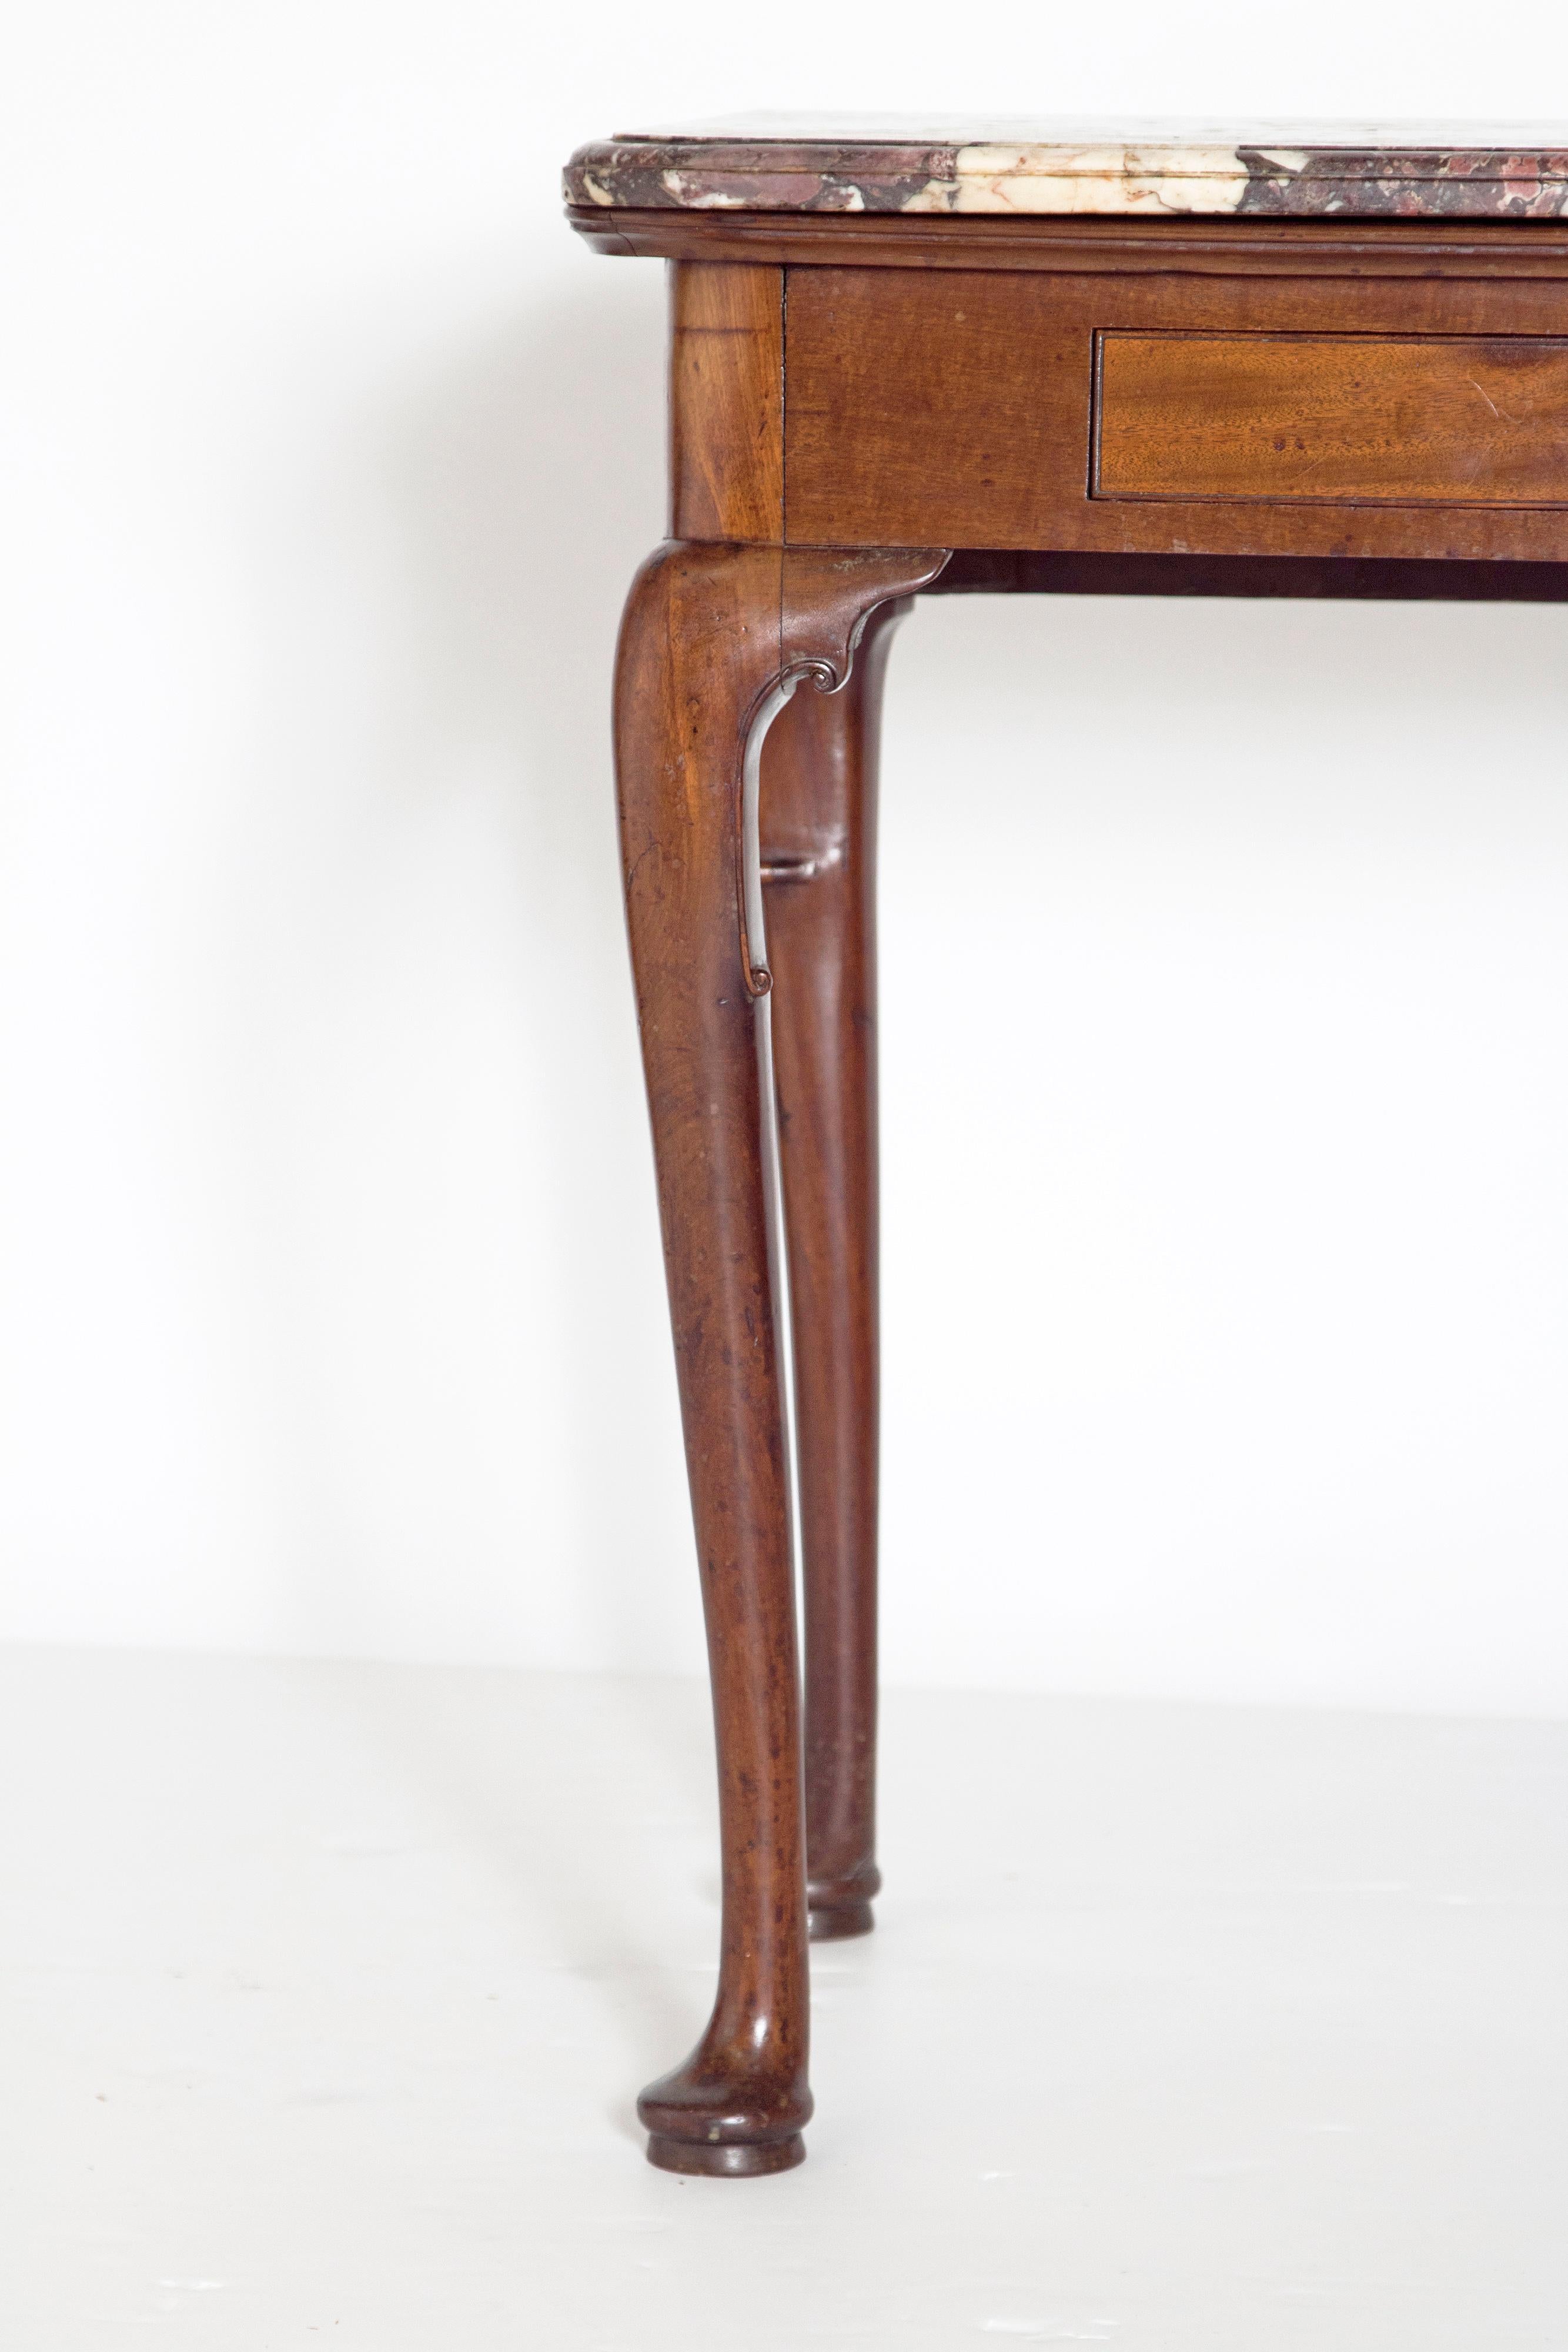 English Early 18th Century Queen Anne Mahogany Side Table